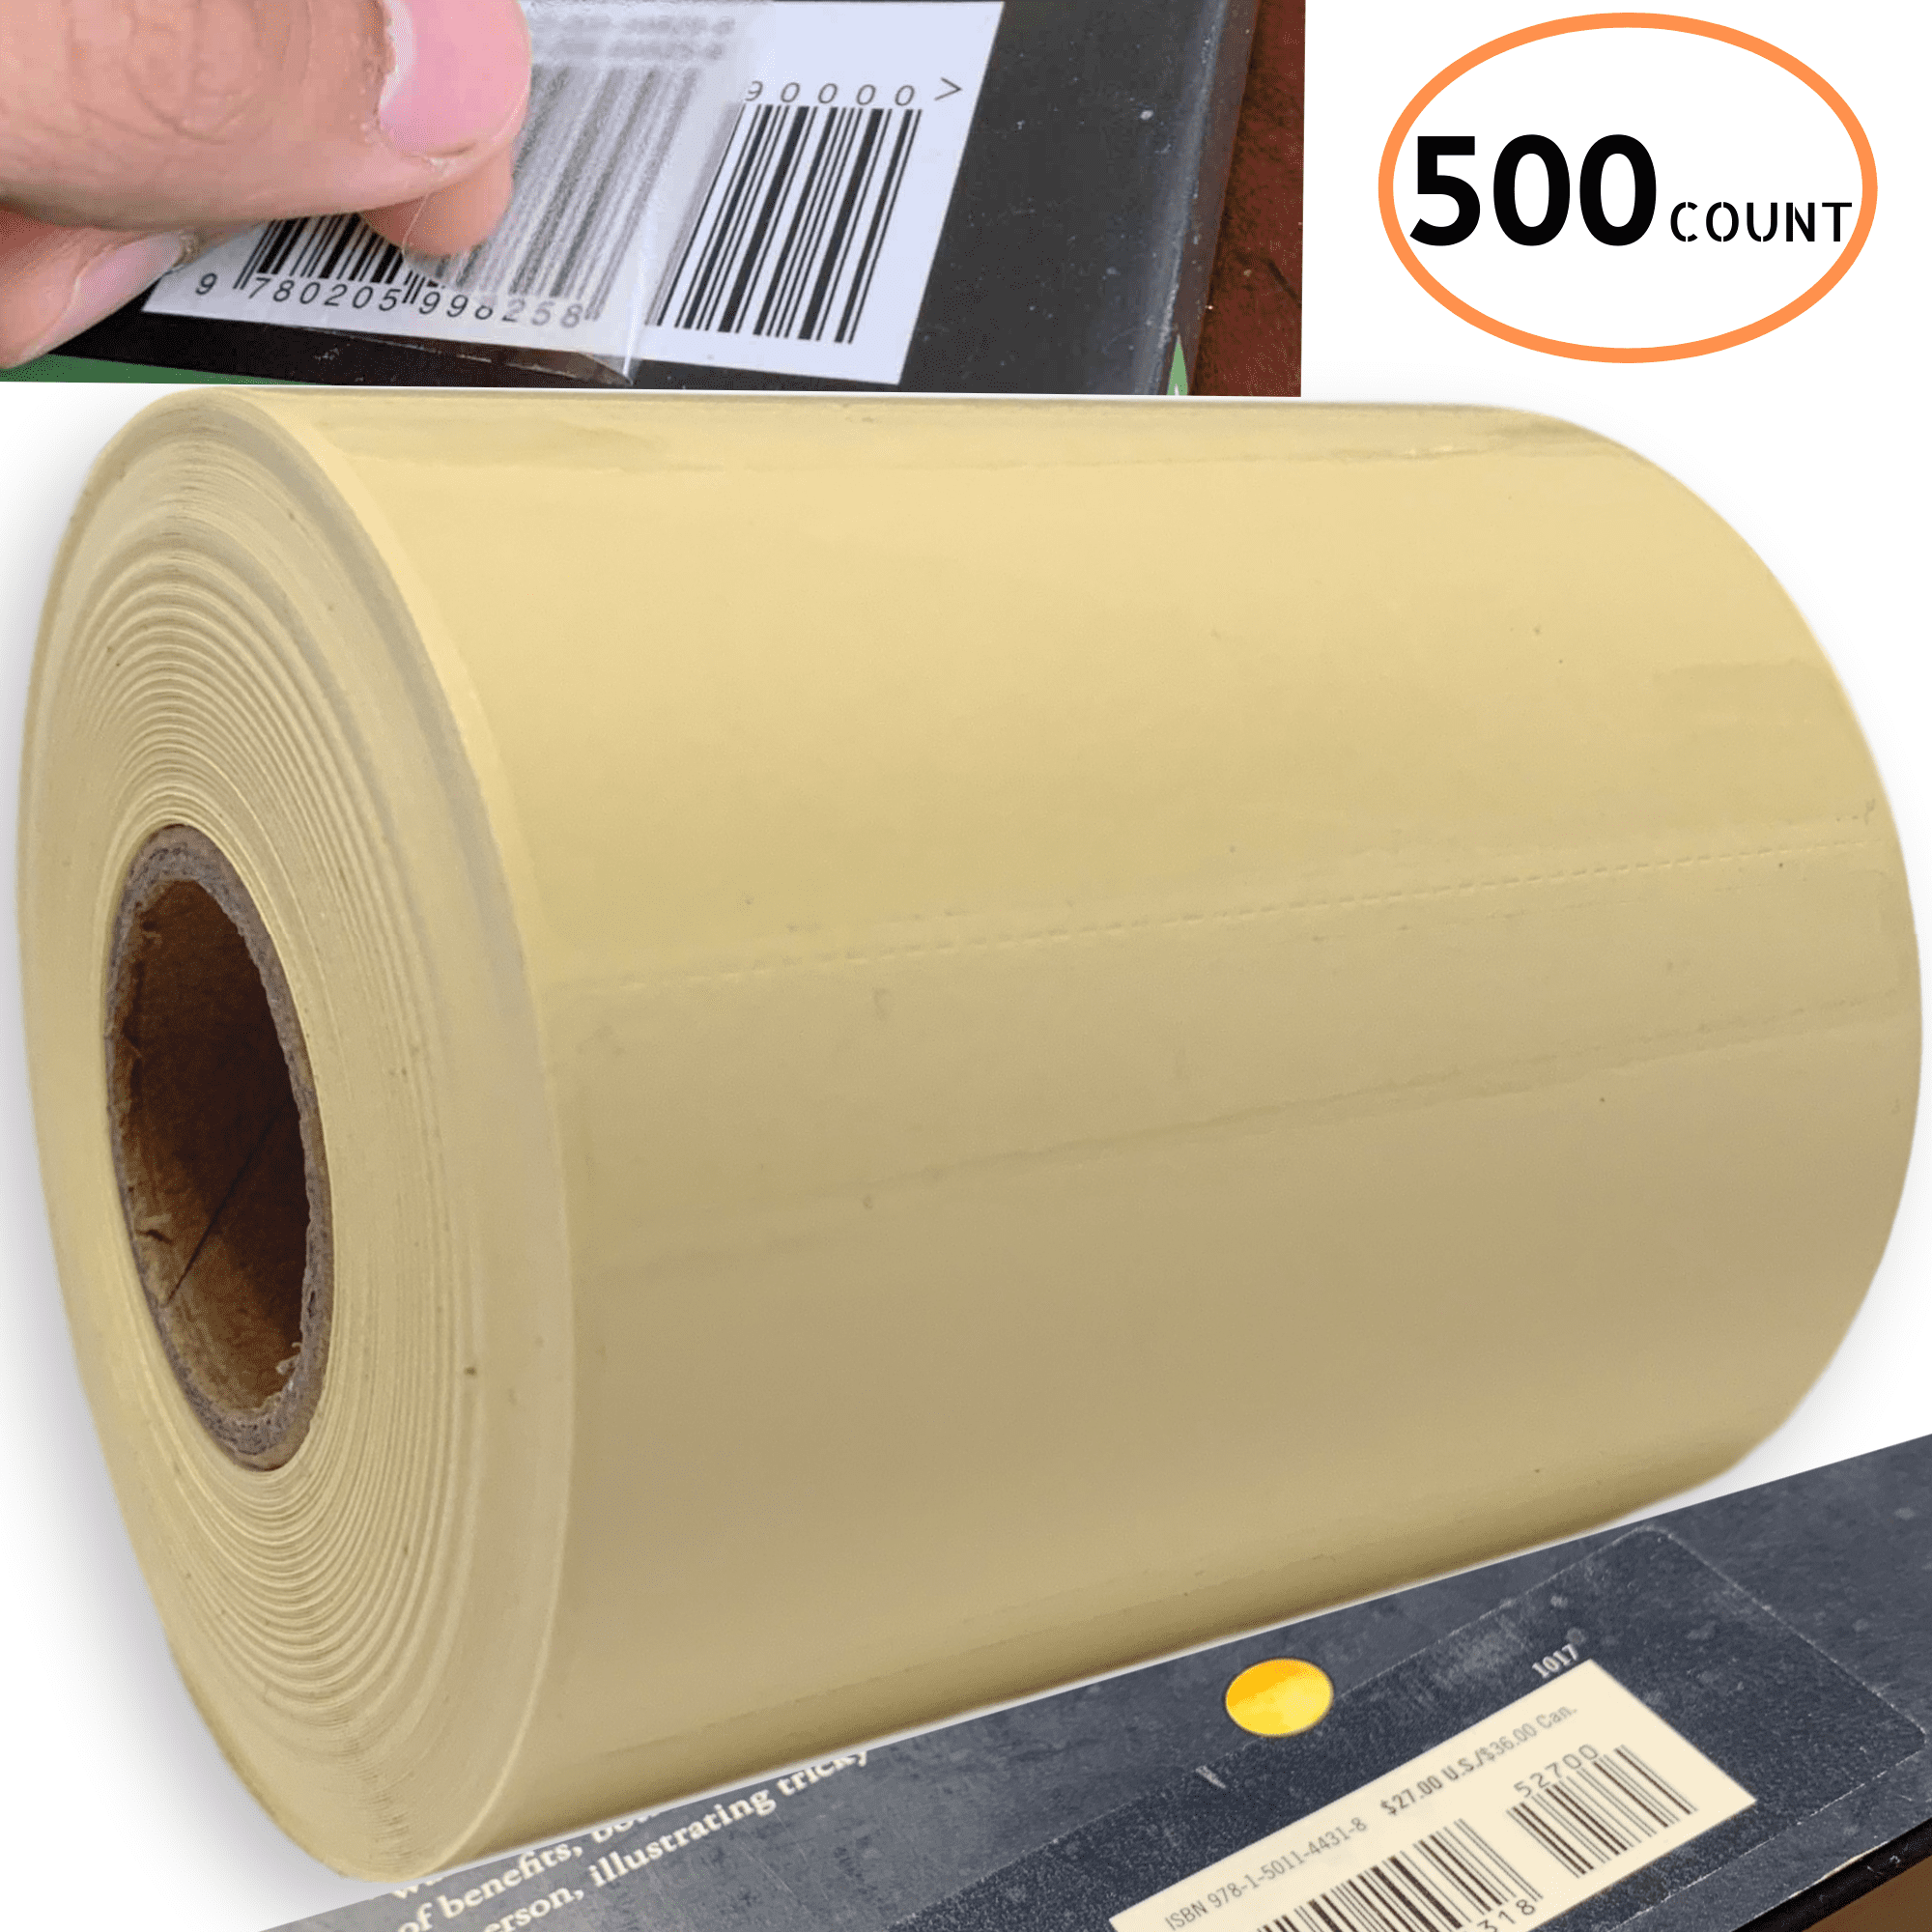 Kapco Vinyl Label Protectors 1 x 3 Inches Clear Round Pack of 500-1371576 